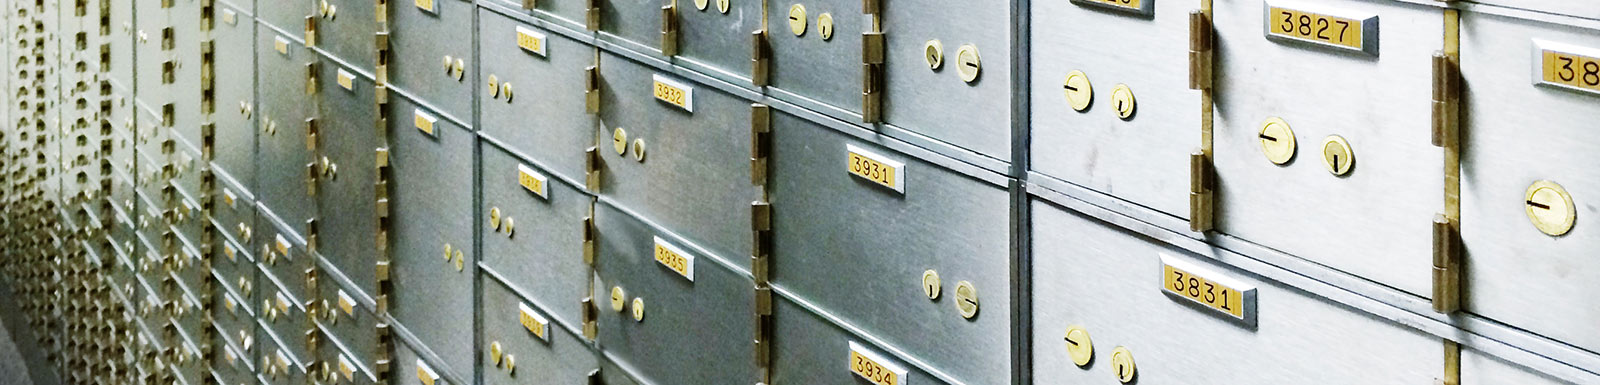 Row of safe deposit boxes